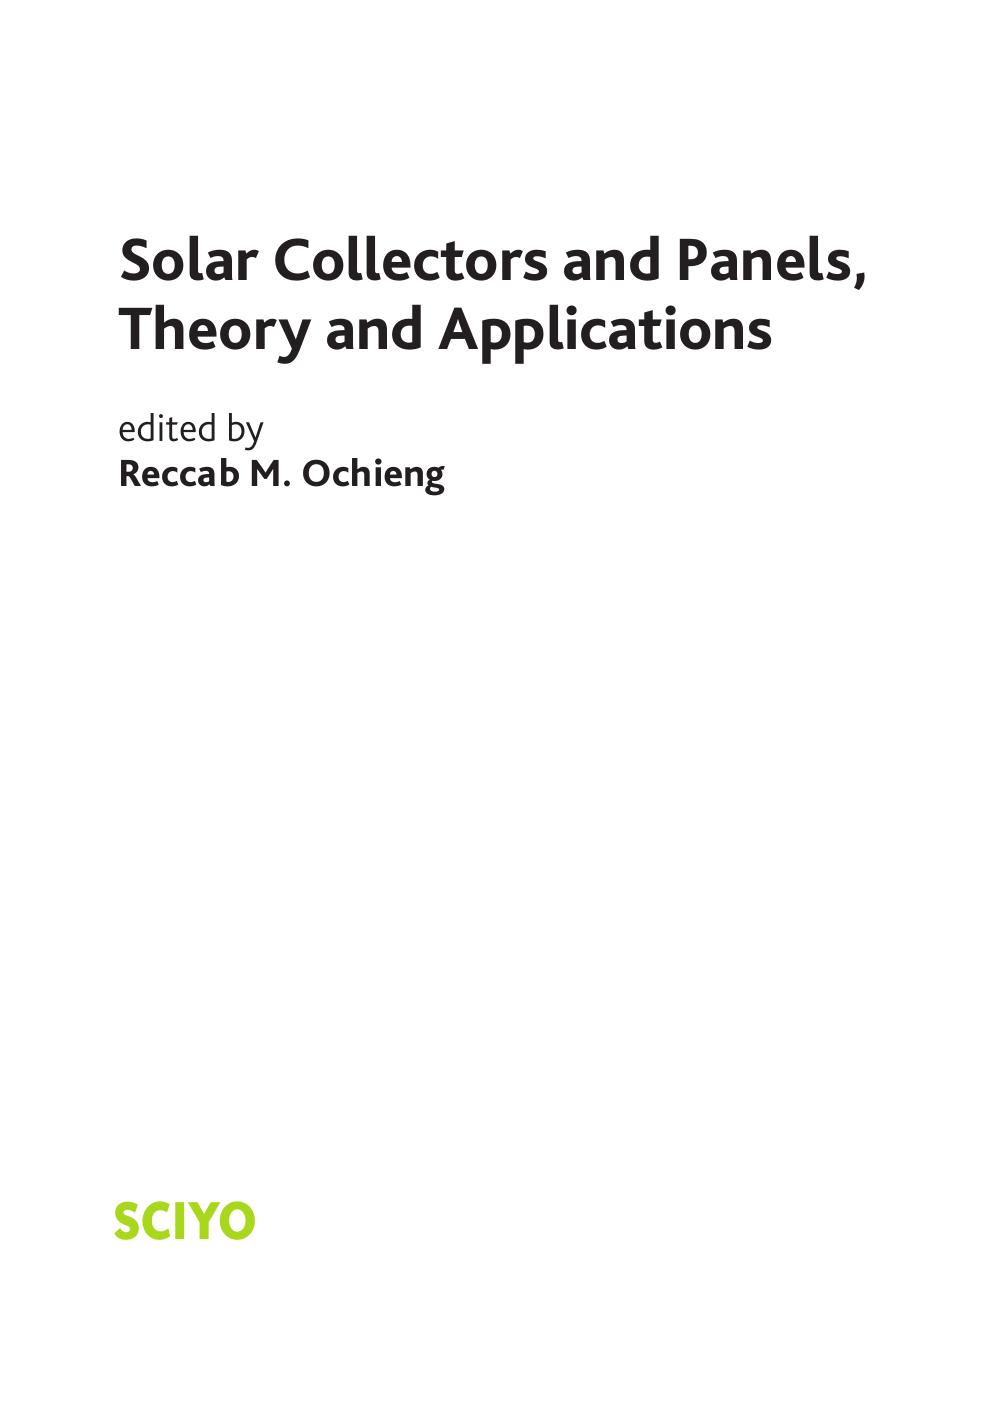 Impressum_Solar Collectors and Panels, Theory and Applications.indd